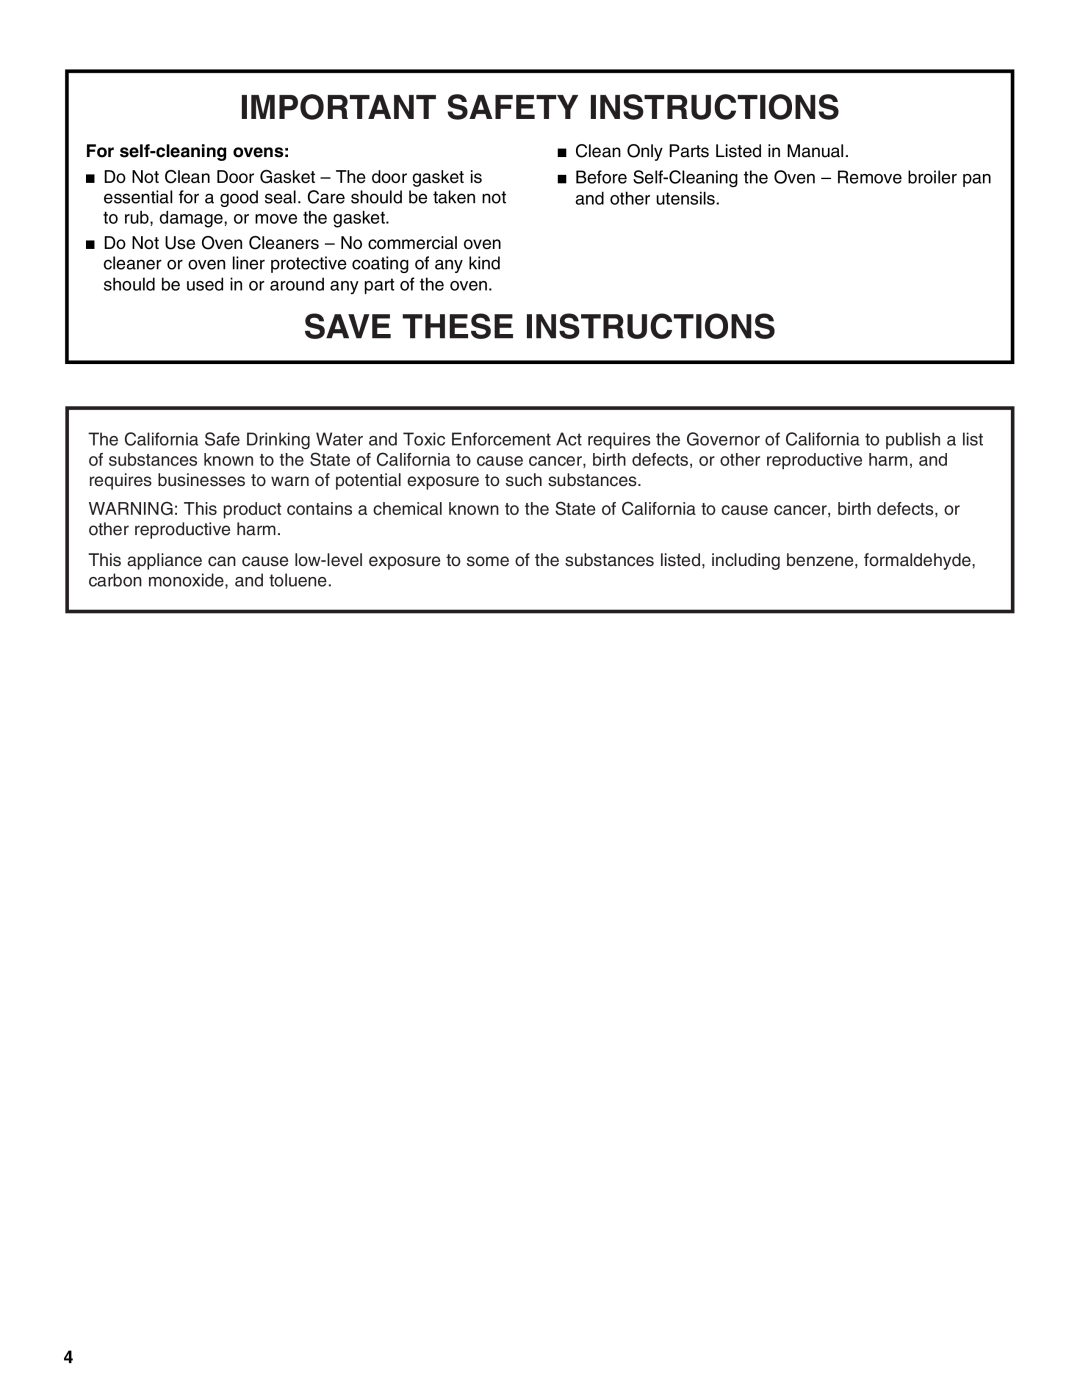 Amana KEBV208, KEBC247, KEBS207, KEBC177 For self-cleaning ovens, Important Safety Instructions, Save These Instructions 